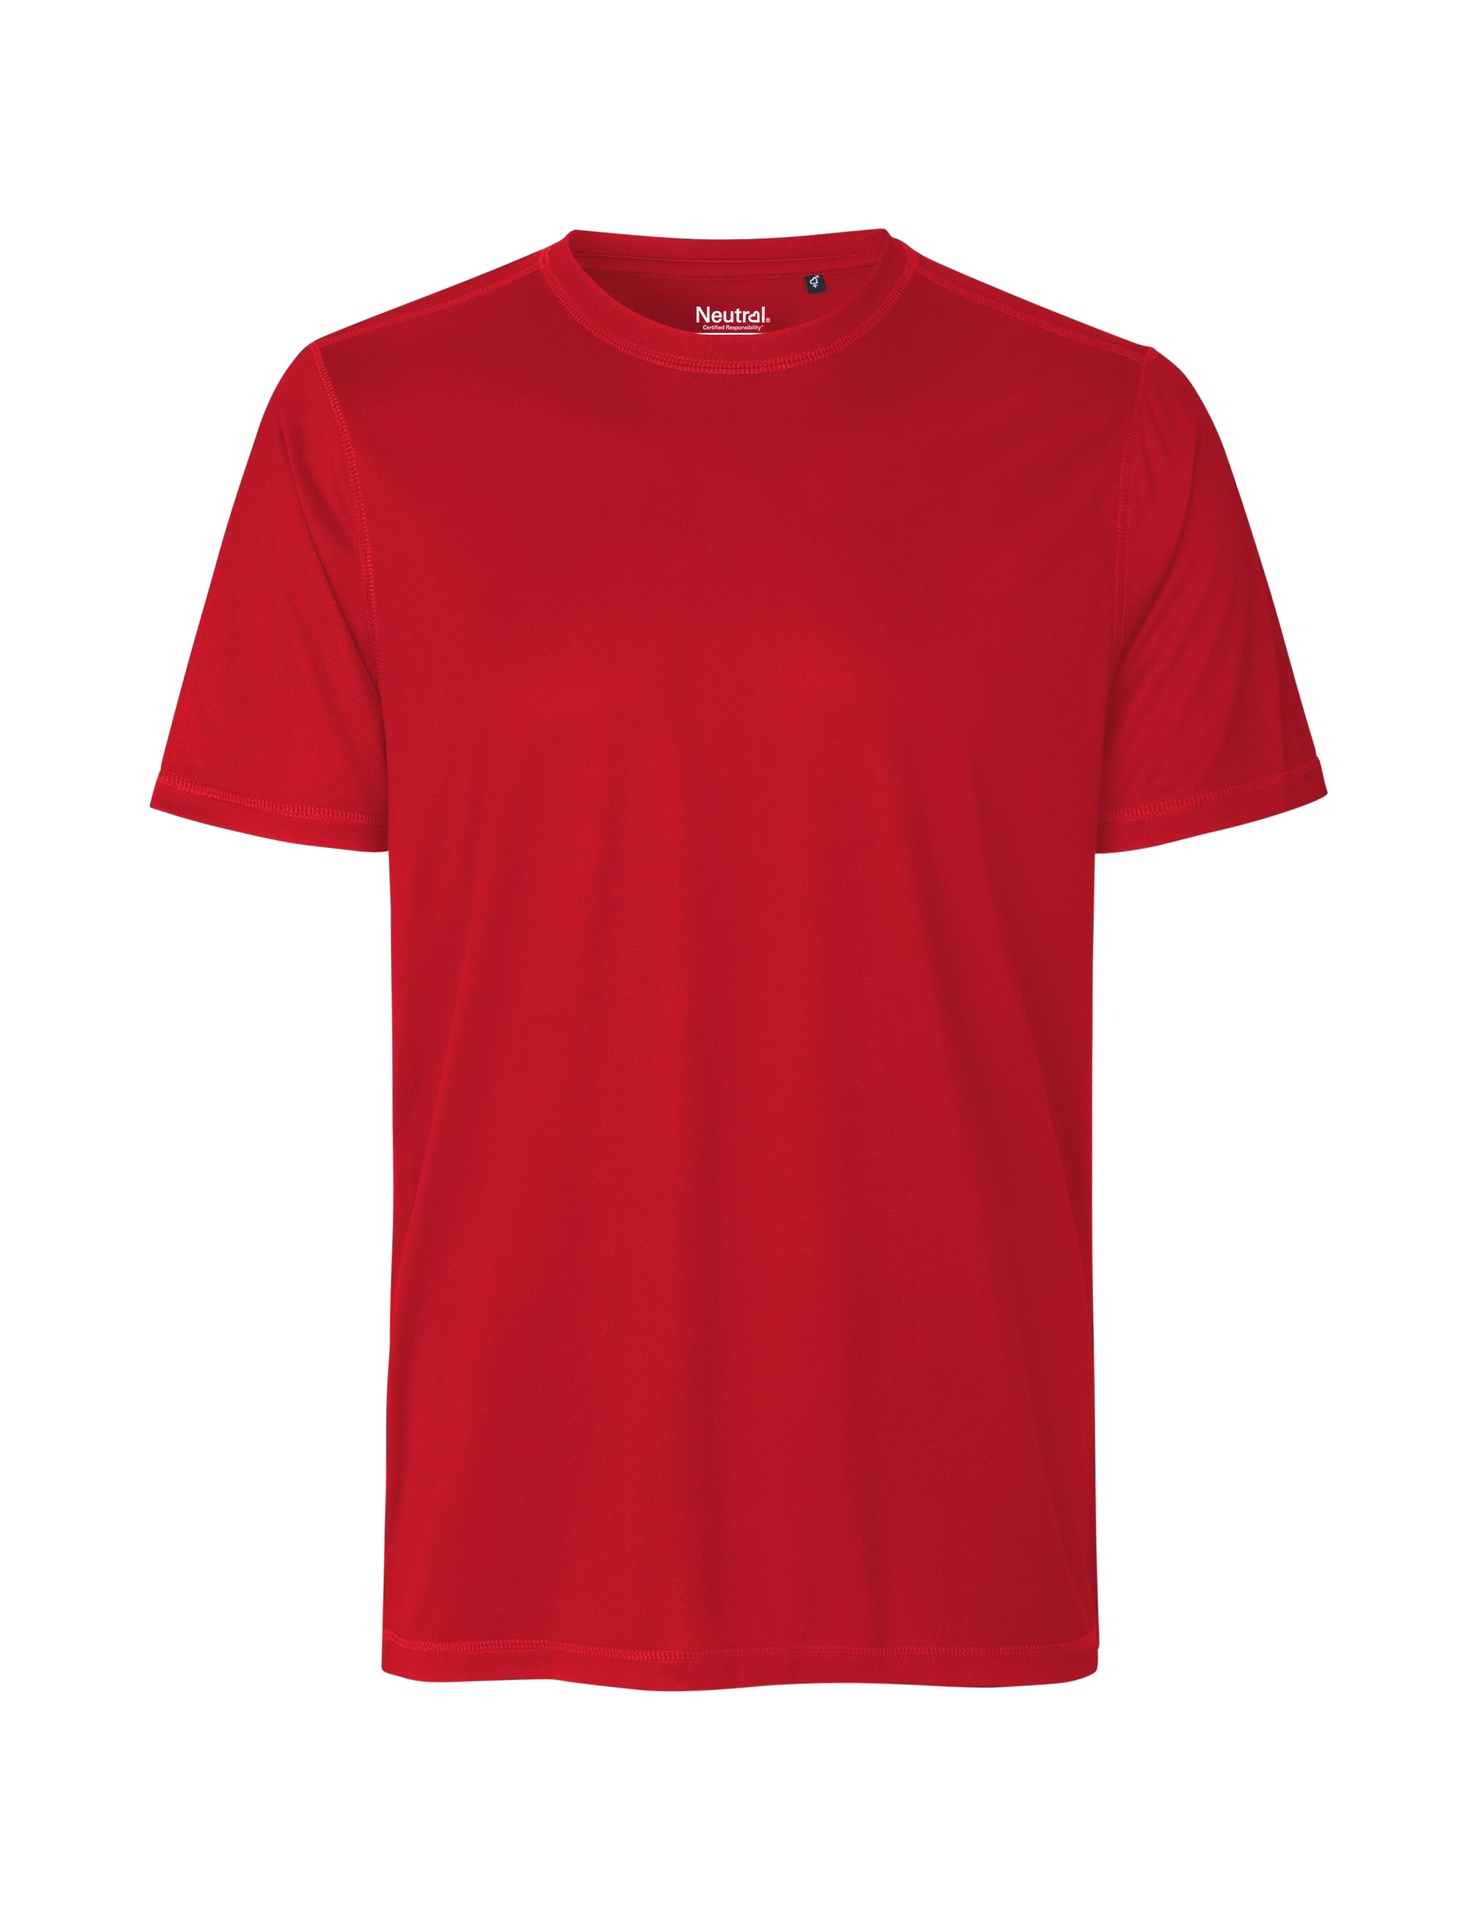 [PR/03767] Recycled Performance T-Shirt (Red 05, M)